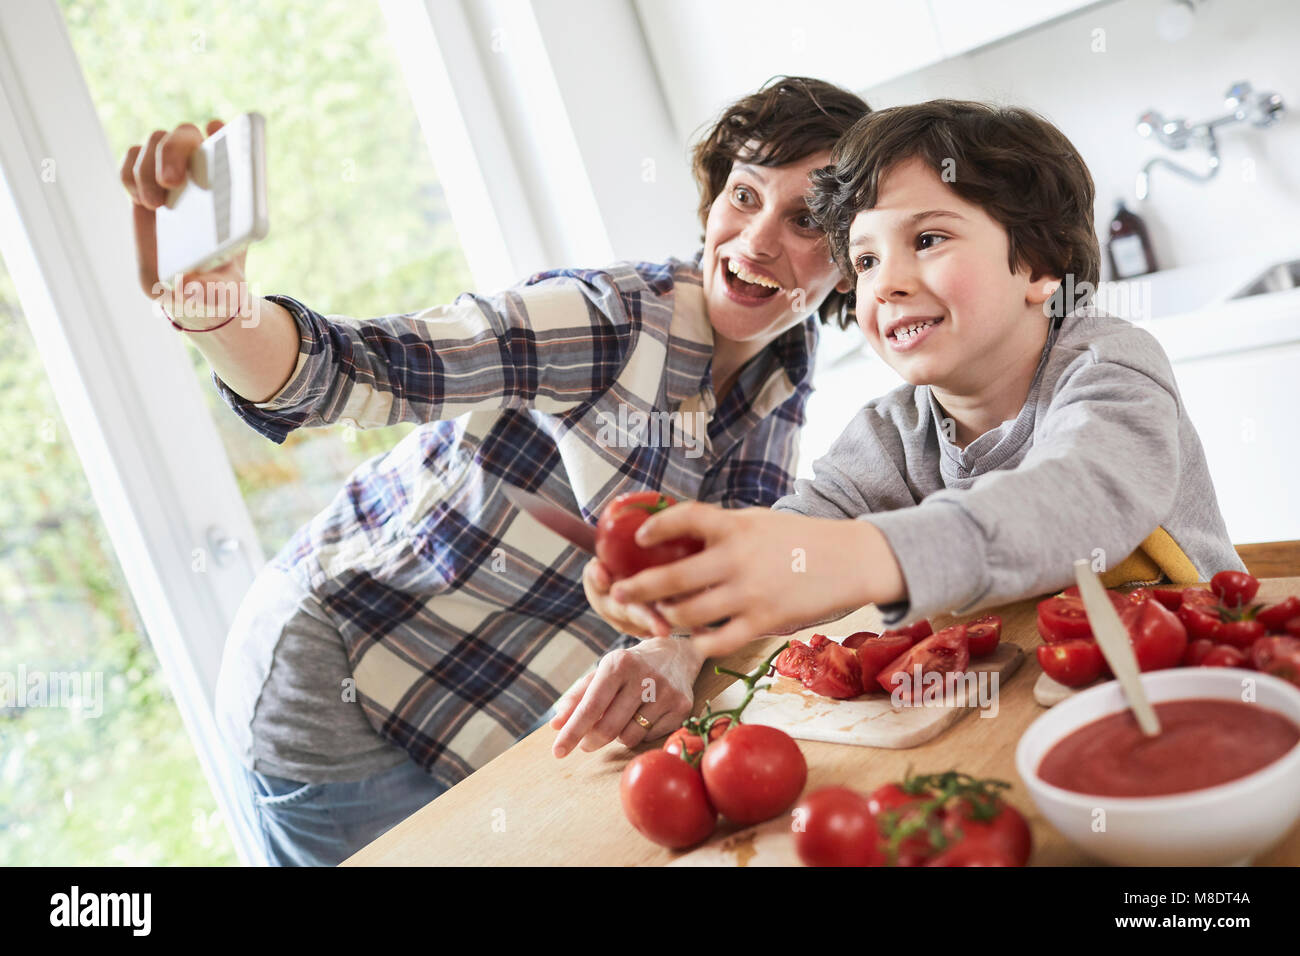 Mother and son preparing food in kitchen, mother taking selfie using smartphone Stock Photo